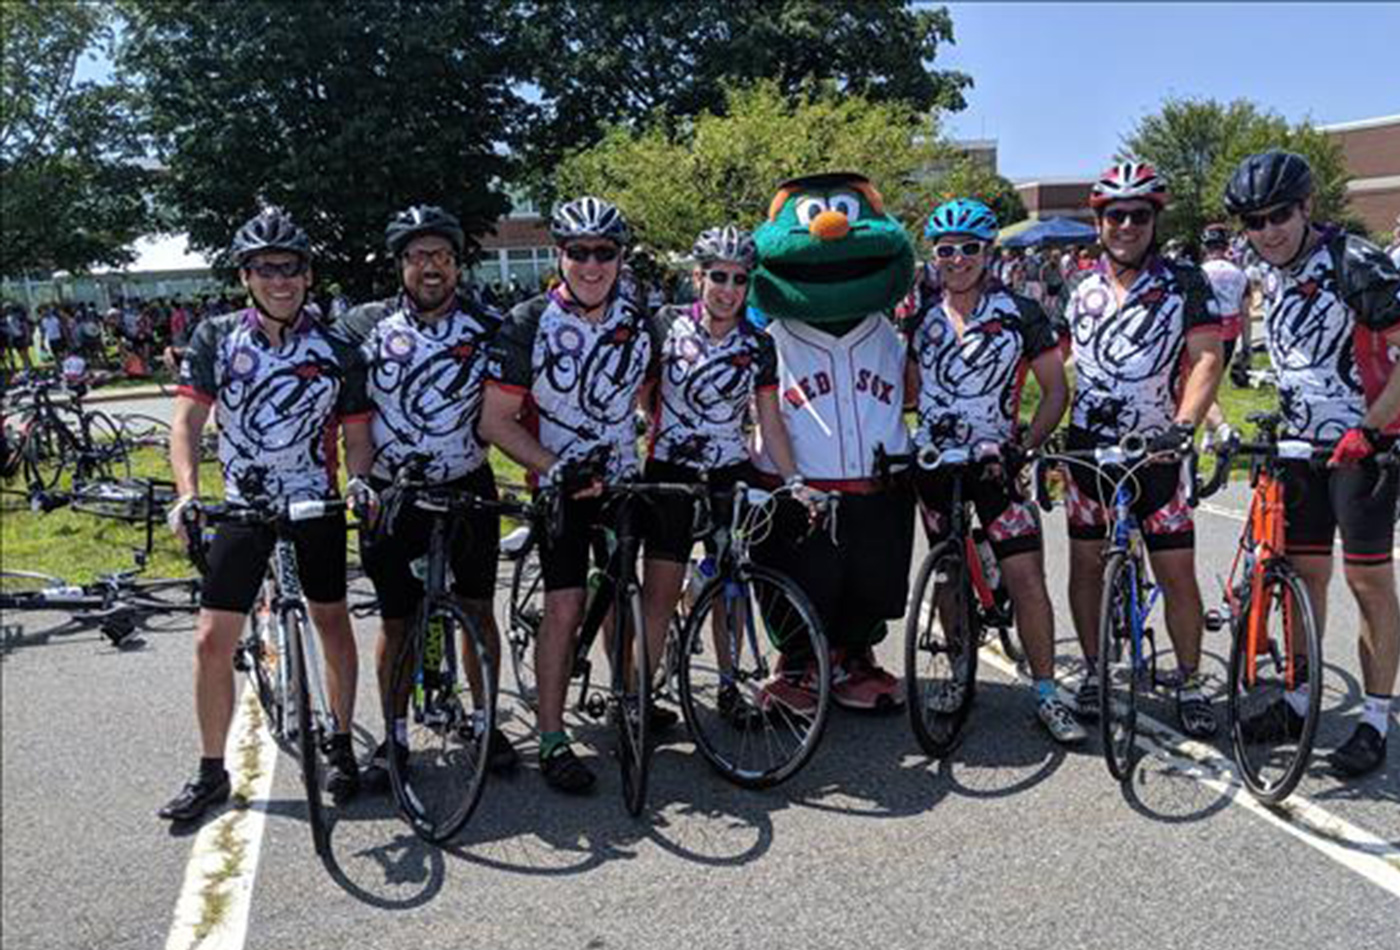 A team of bicyclists pose with the Red Sox mascot.